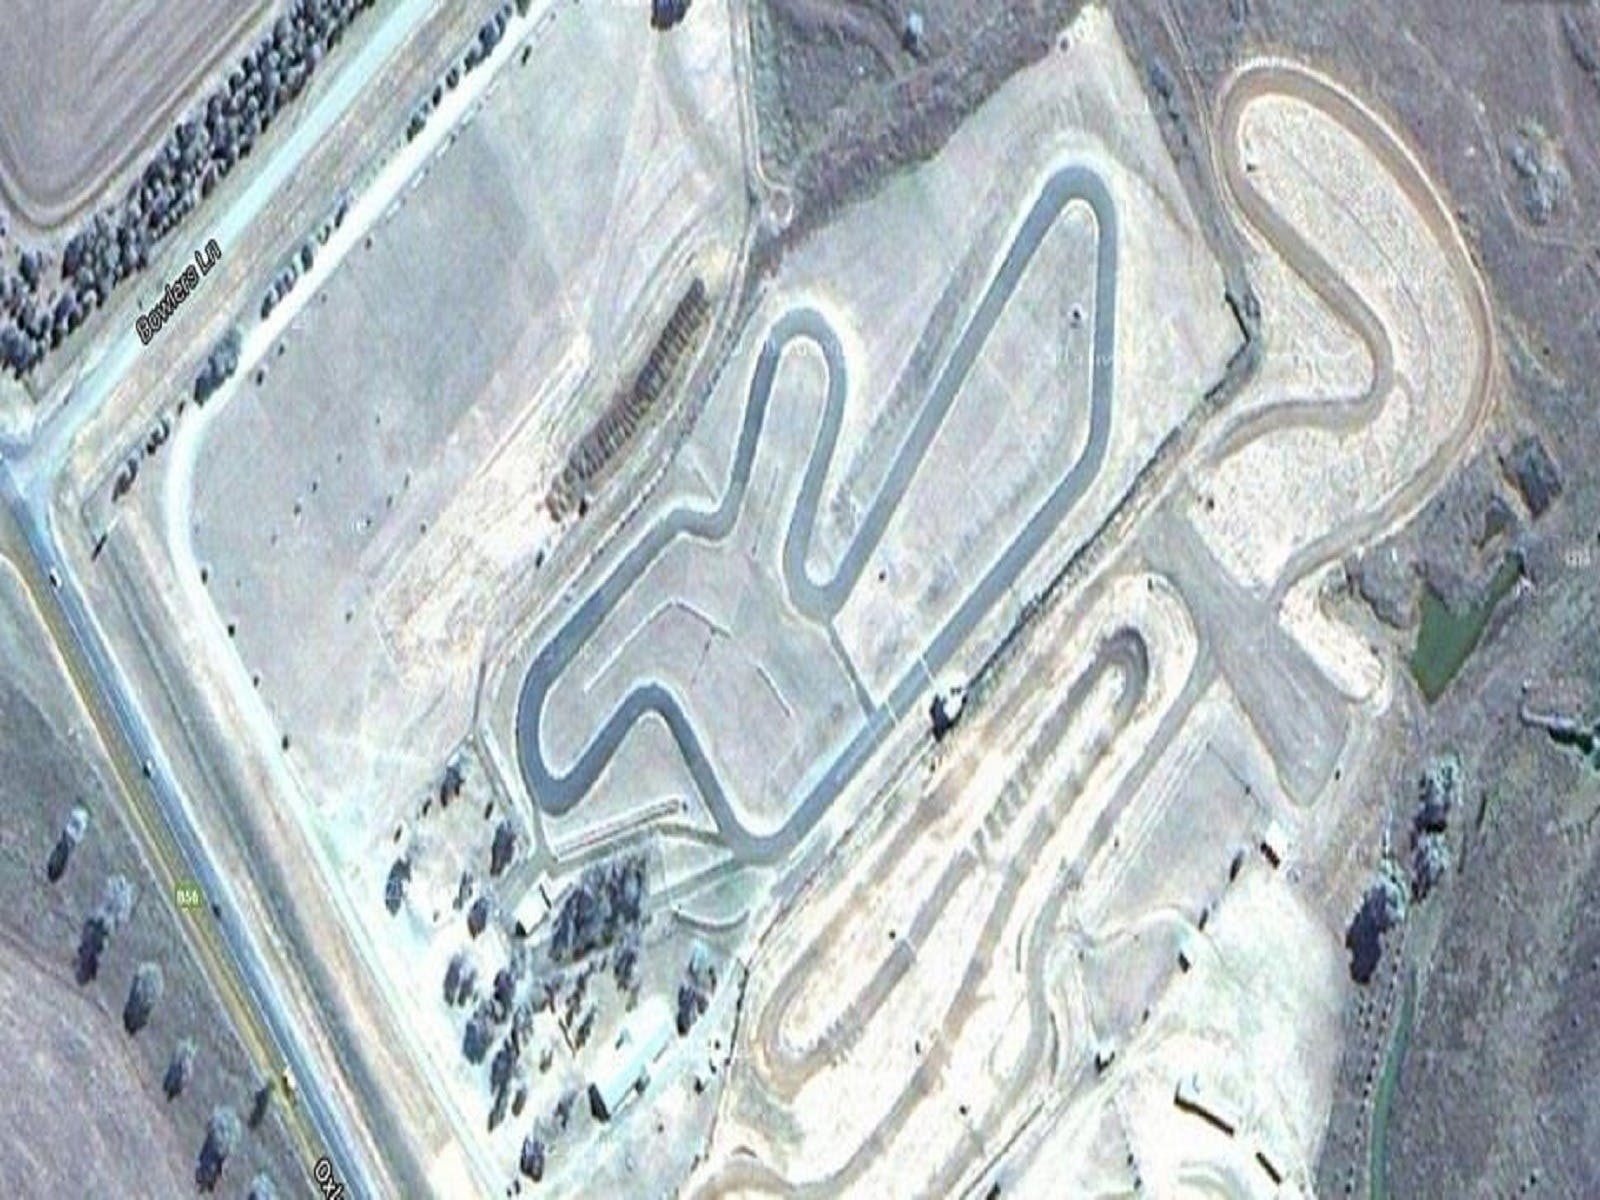 Image from above of Oakburn Park Motorsports Complex